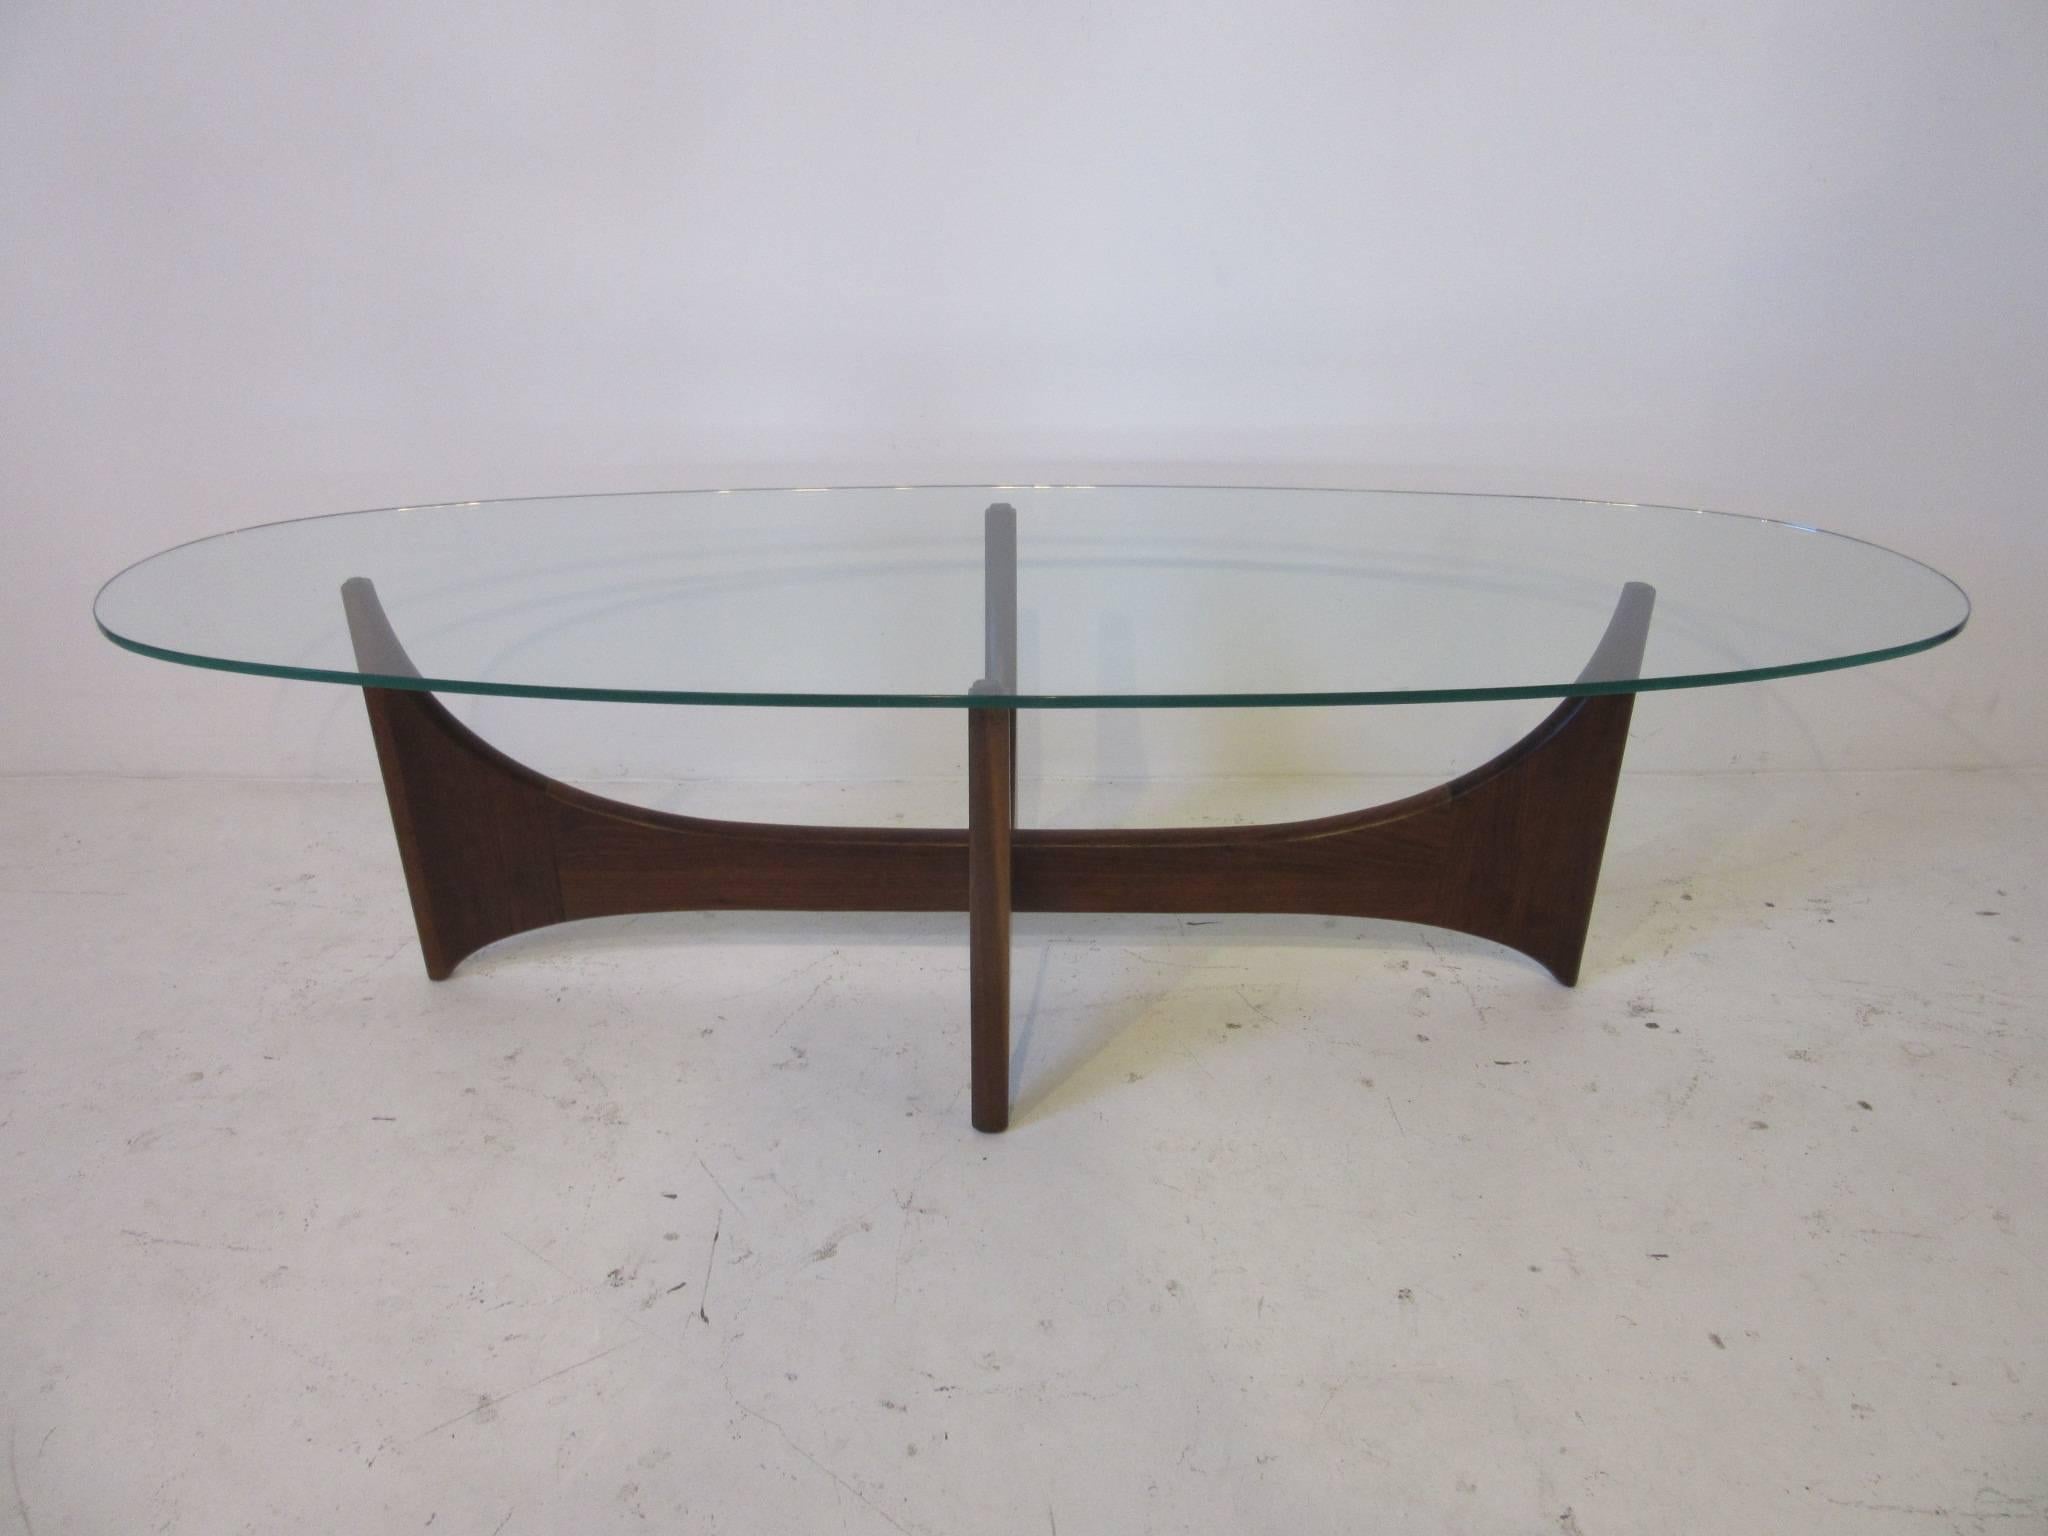 Sculptural Walnut and Glass Adrian Pearsall Coffee Table 1